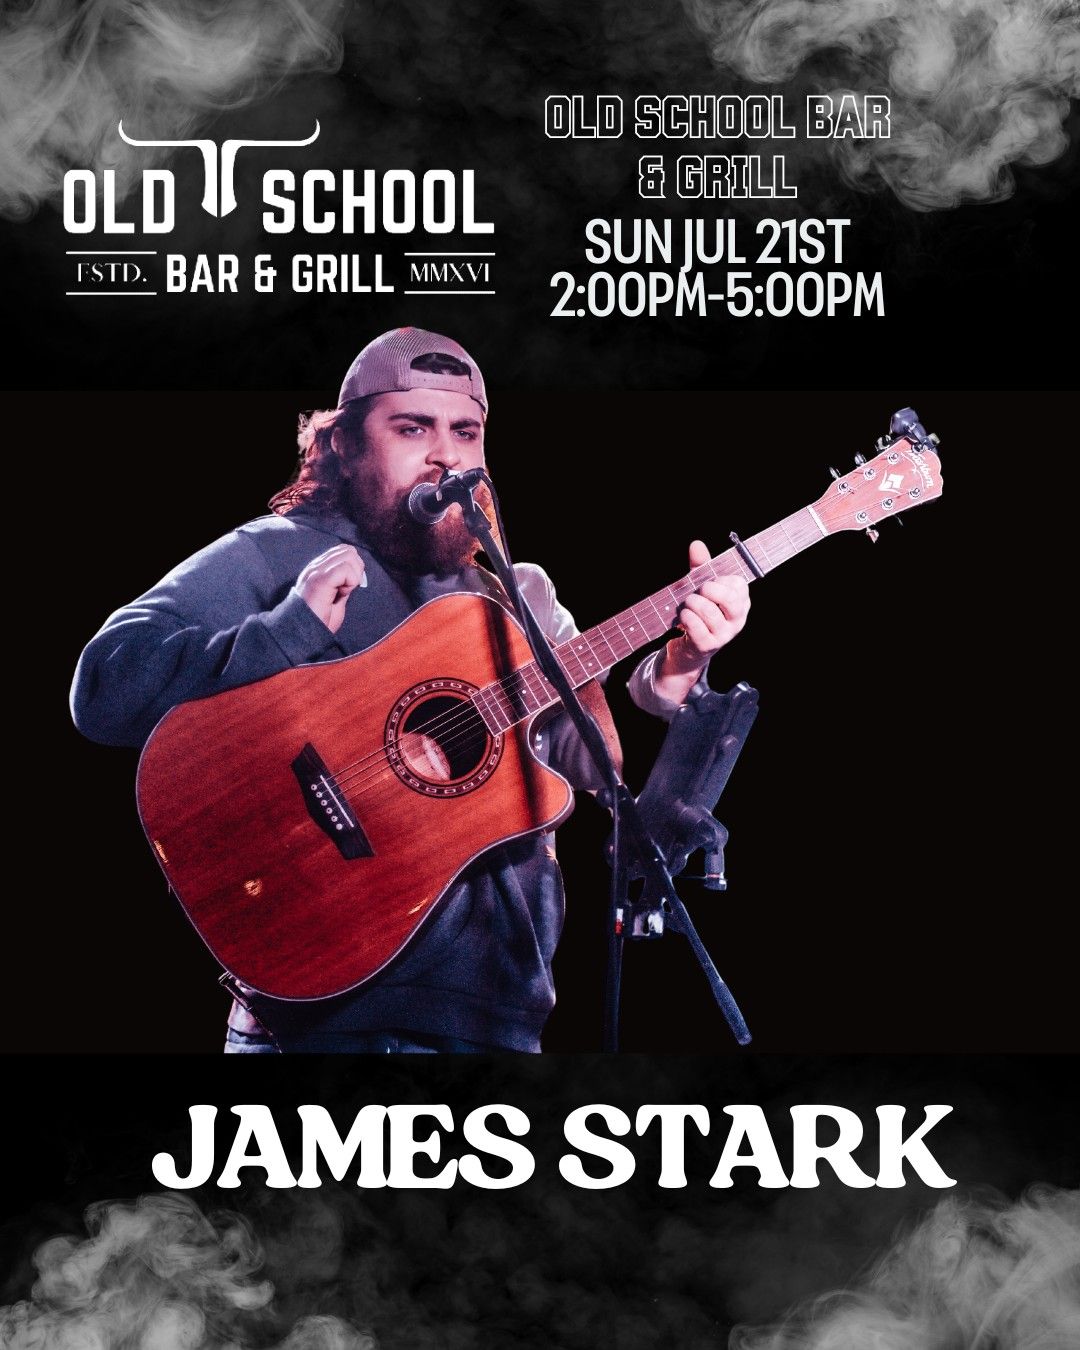 James Stark Live at Old School Bar and Grill!